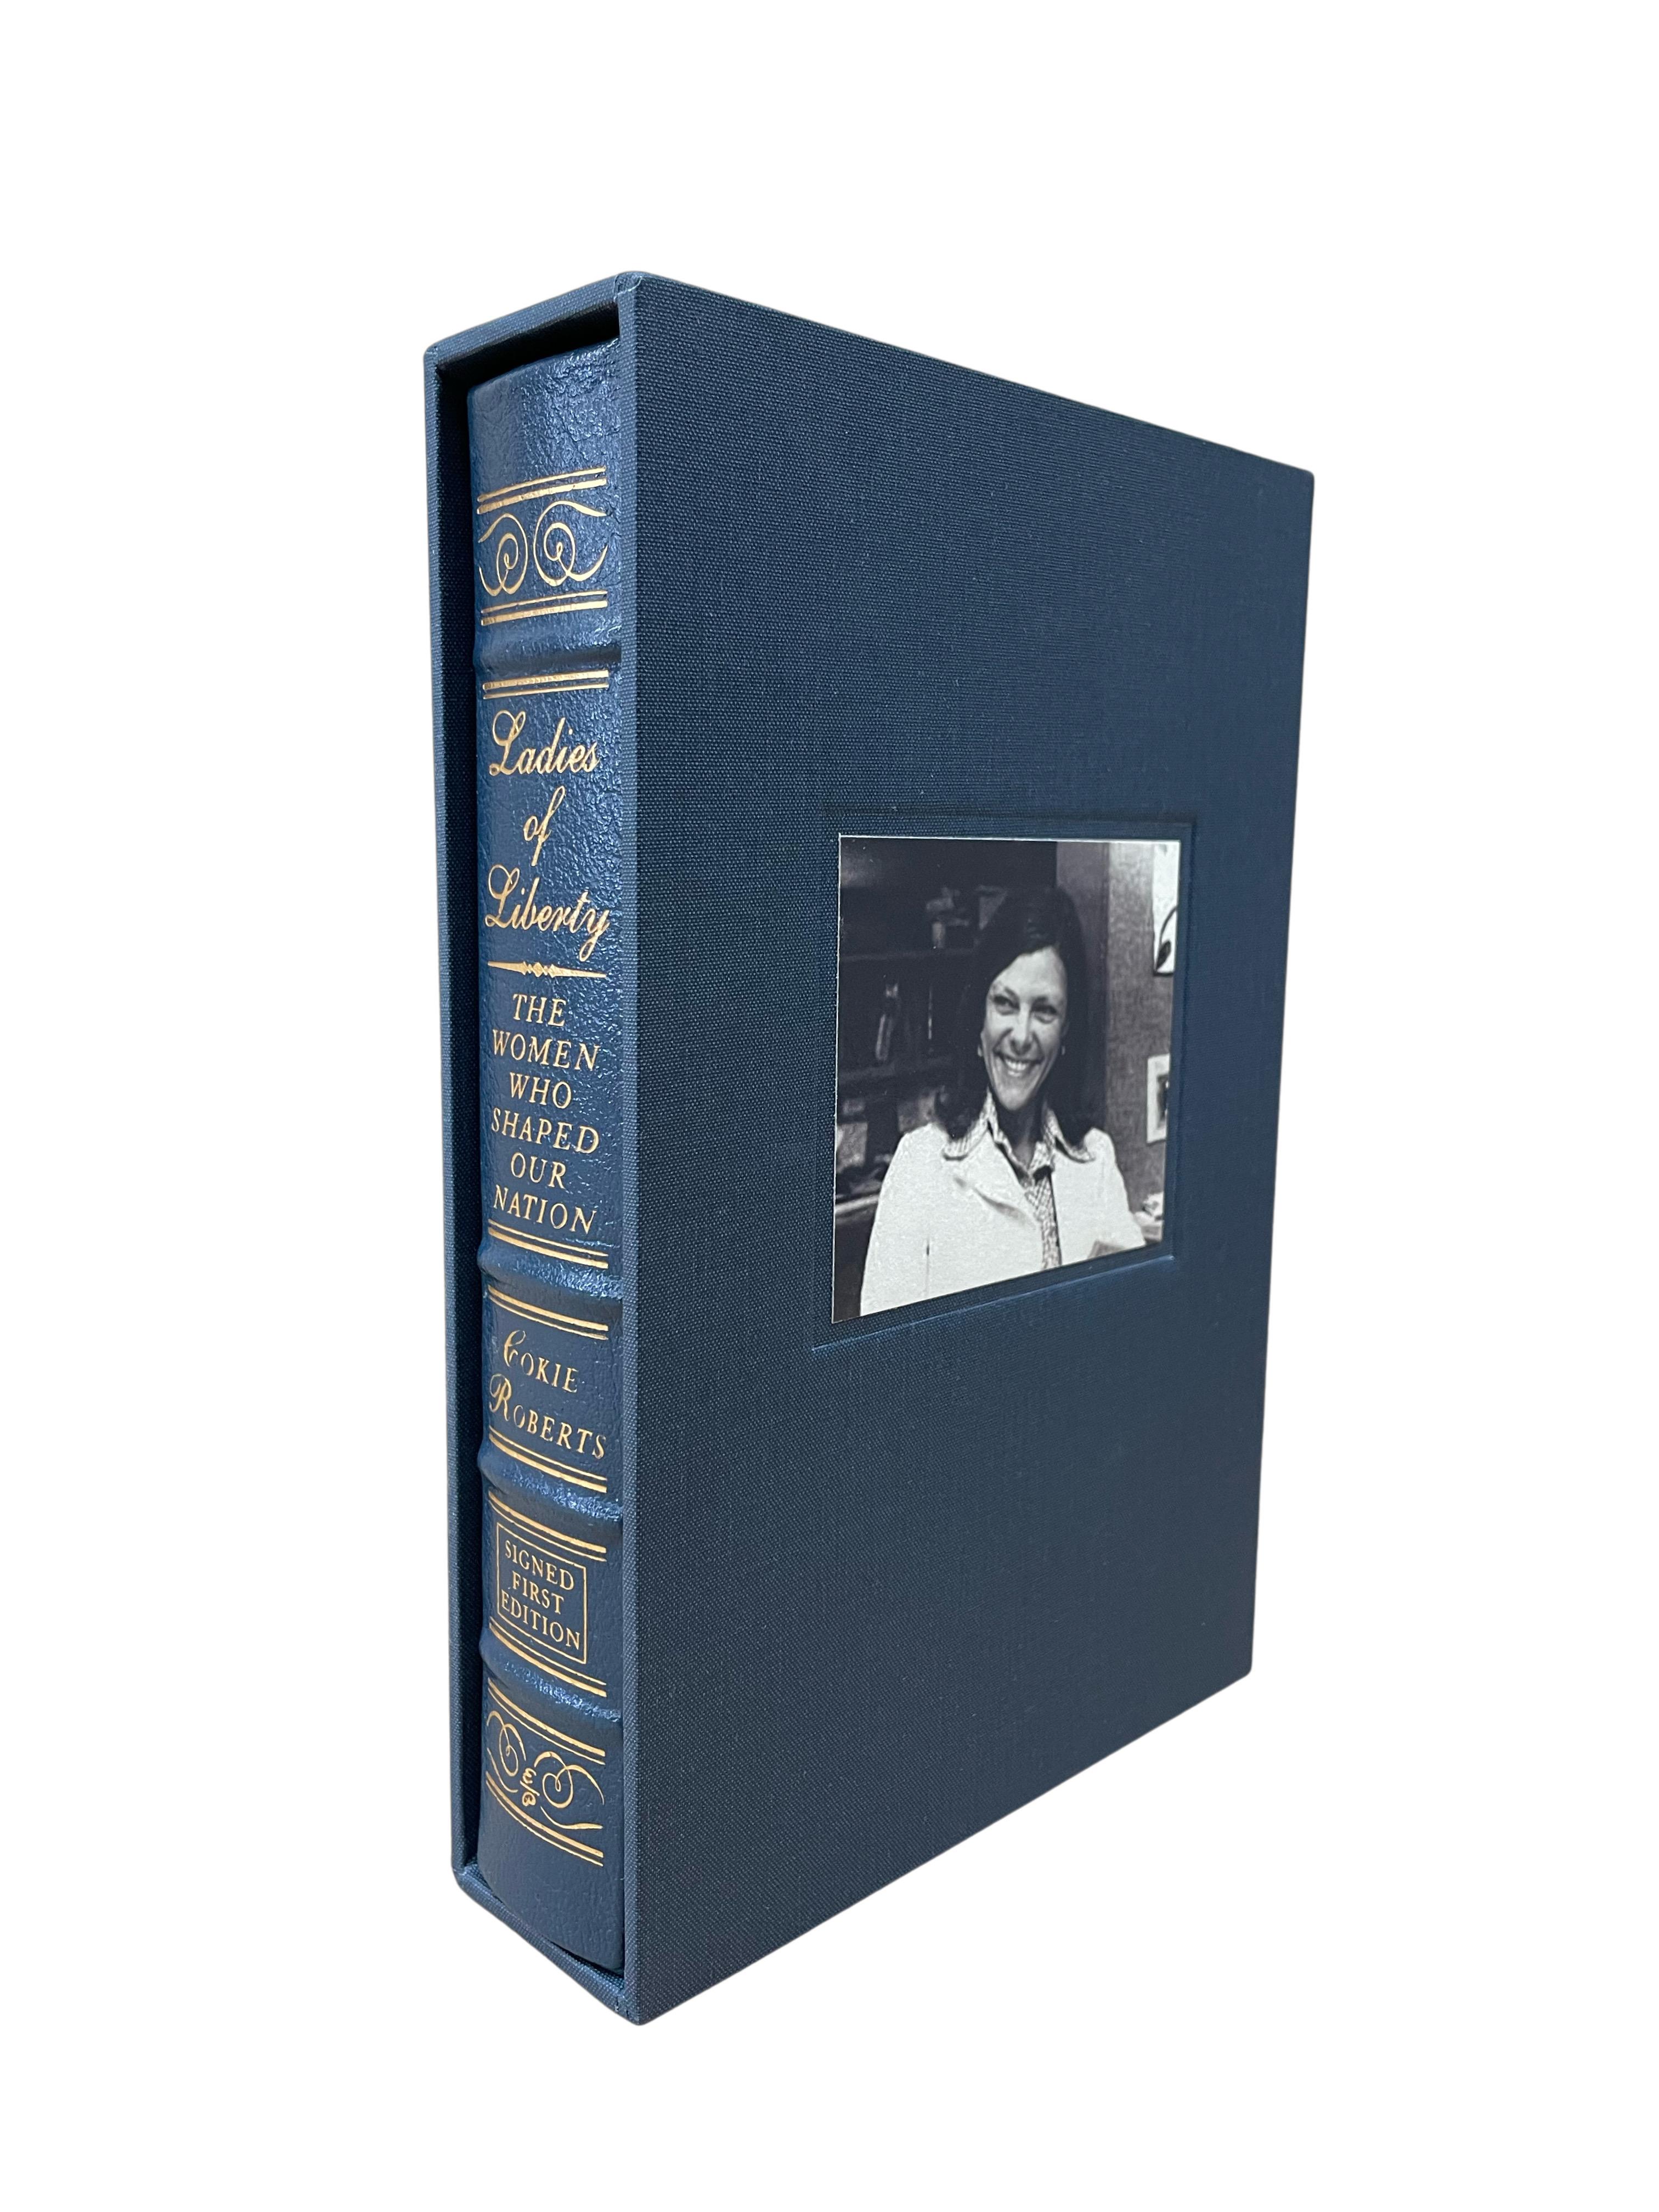 Roberts, Cokie. Ladies of Liberty: The Women Who Shaped Our Nation. Norwalk: The Easton Press, 2008. Signed, Limited Edition of 1050. Octavo. In the publisher's original full blue leather boards, lettered and decorated in gilt. New archival